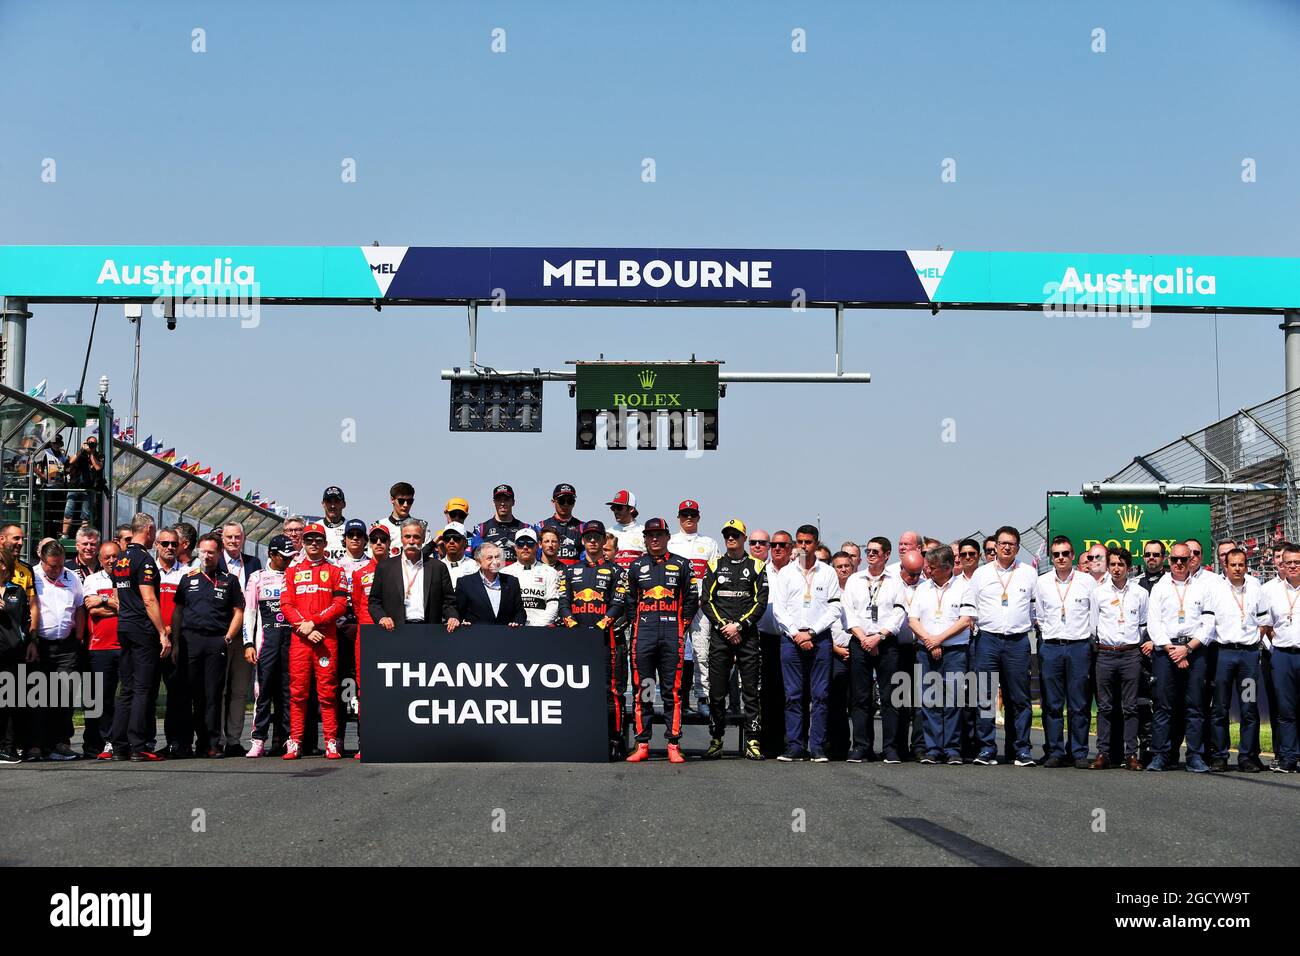 The teams and FIA pay respects to Charlie Whiting. Australian Grand Prix, Sunday 17th March 2019. Albert Park, Melbourne, Australia. Stock Photo